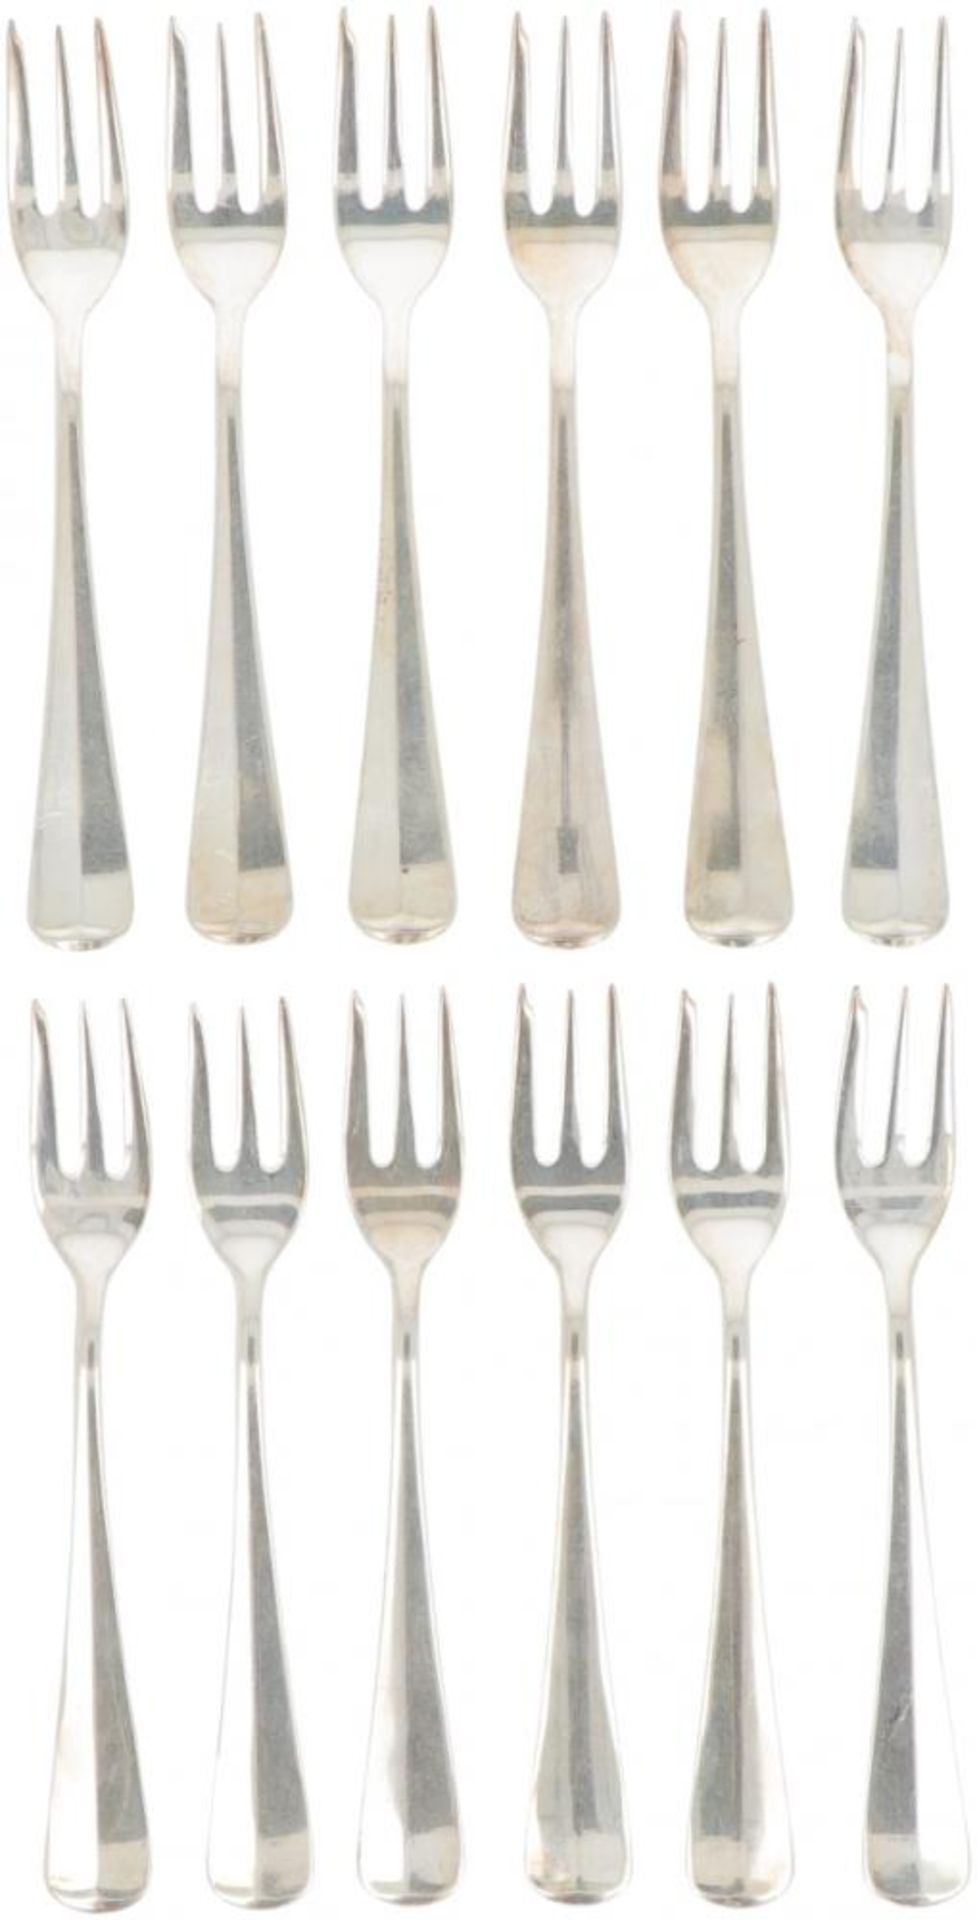 (12) piece set of cake forks "Haags Lofje" silver.